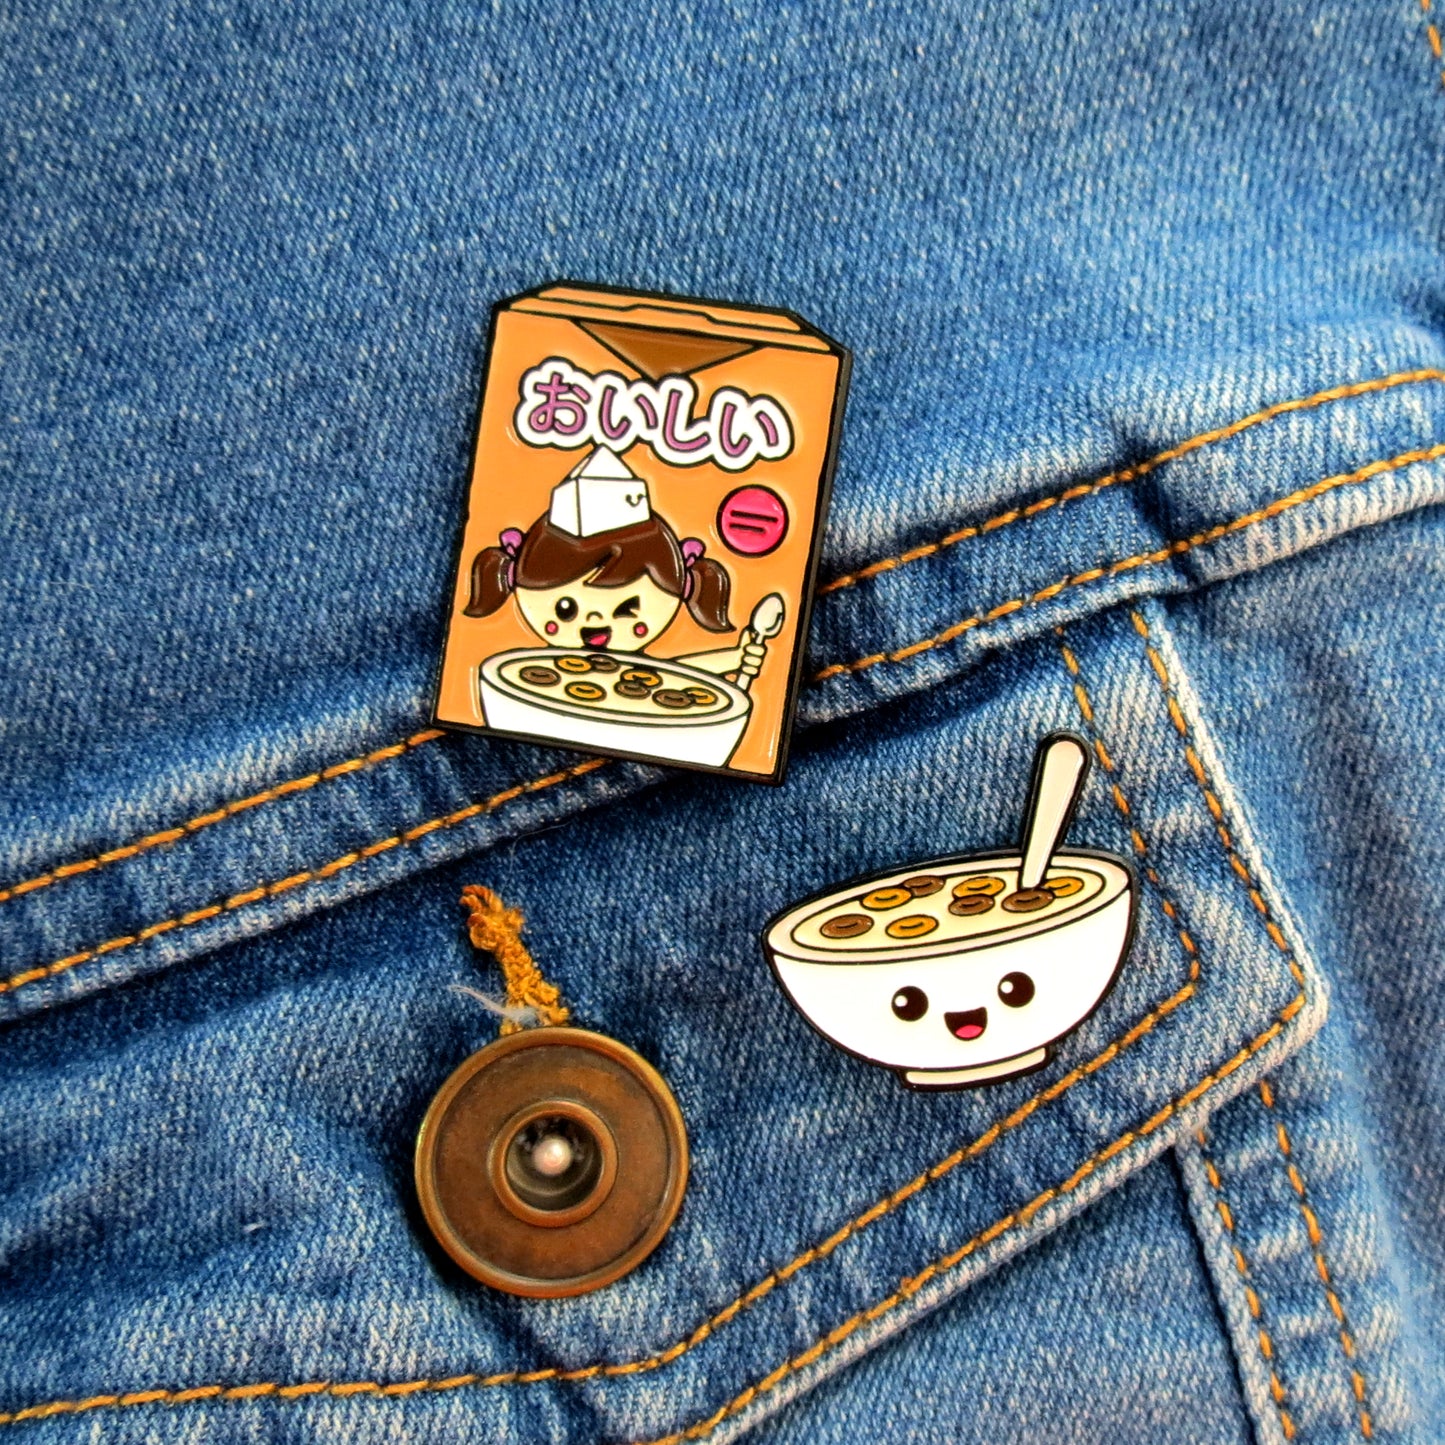 Cocoa Cereal Box and Cereal Bowl enamel pins on jean jacket pocket